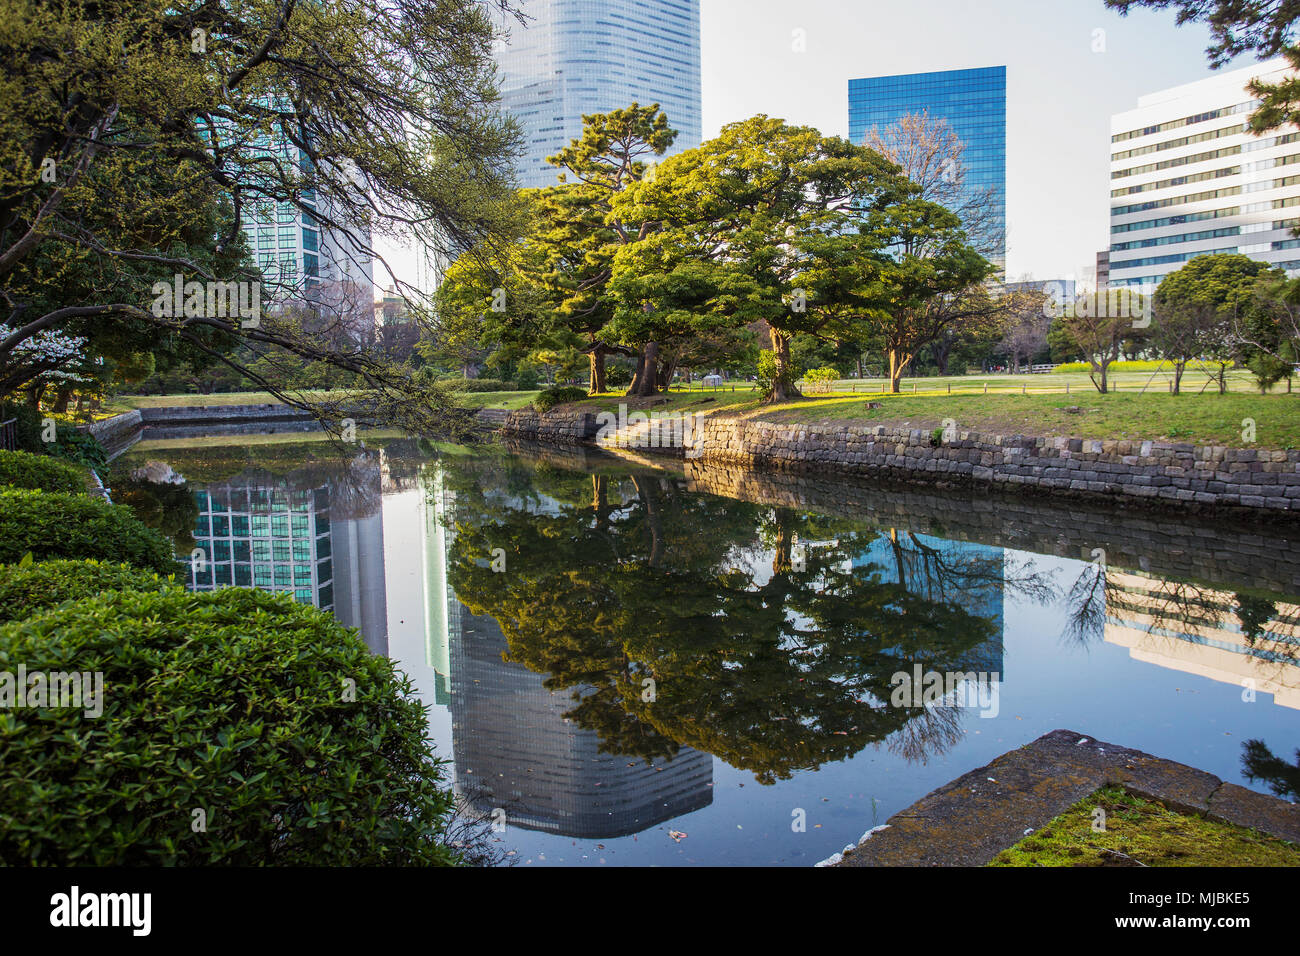 Hamarikyu Gardens are situated near skyscrapers and it is wonderful contrast of nature and urban. Tokyo, Japan. March , 2015 Stock Photo - Alamy